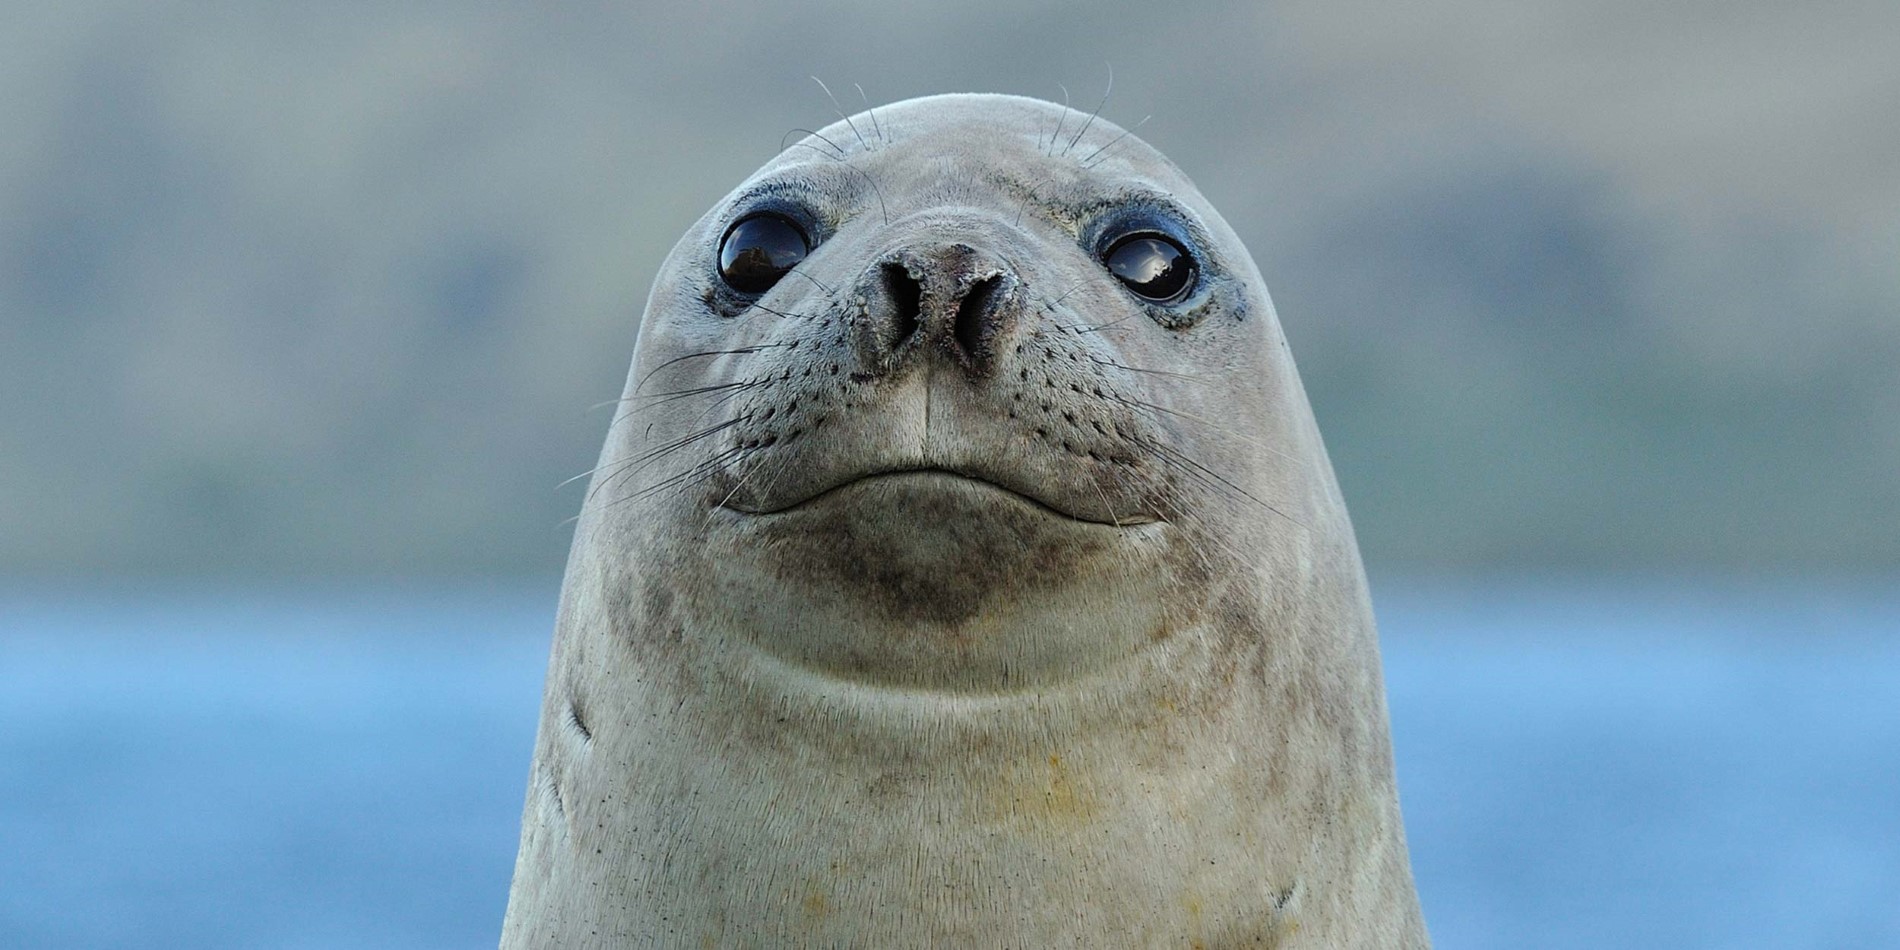 A close up of a seal